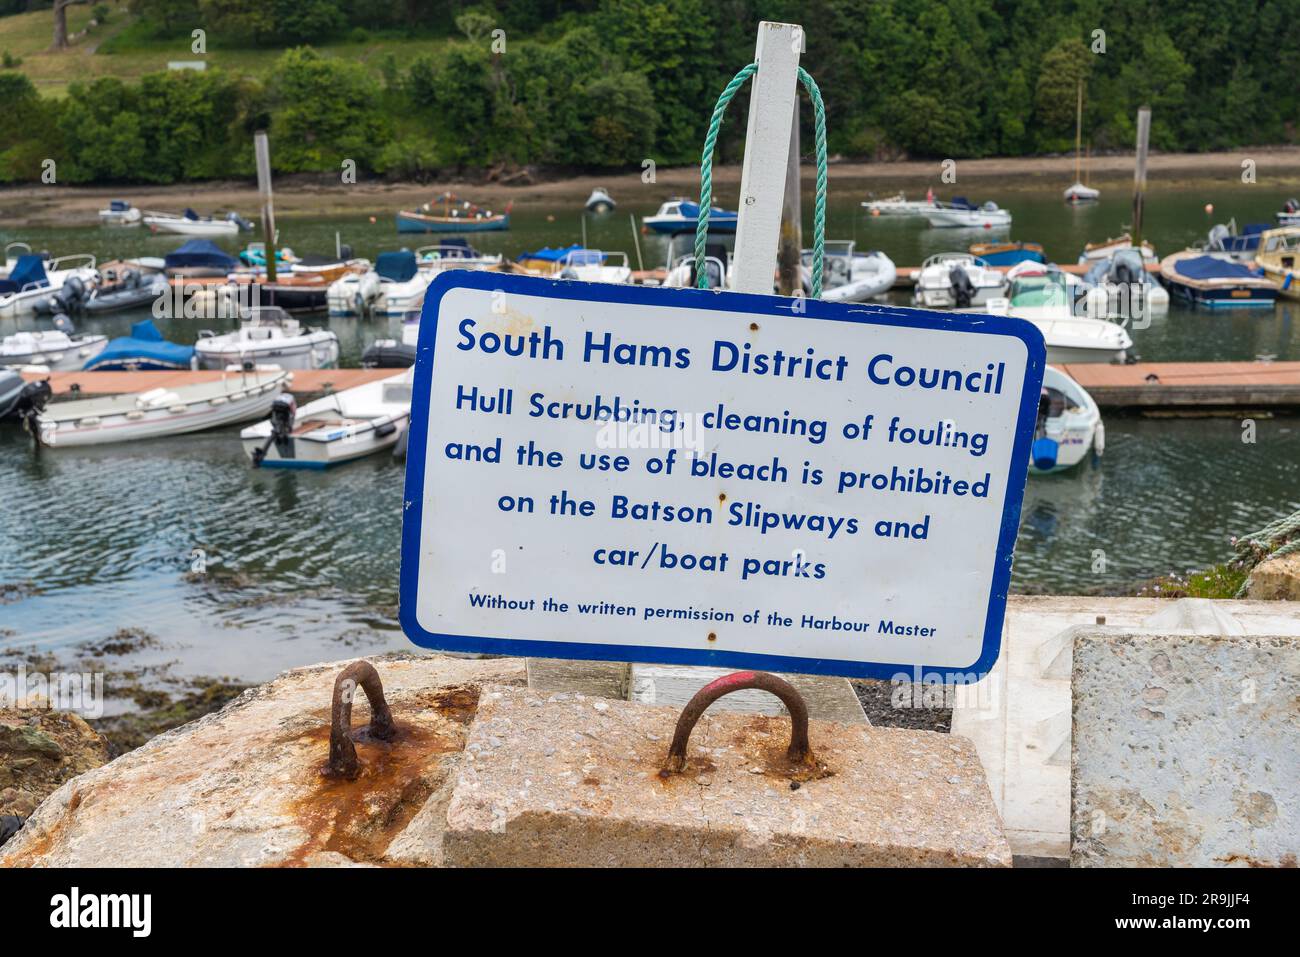 Sign prohibiting hull scrubbing, cleaning of fouling and use of bleach on boat hulls on batson slipway and car or boat parks in salcombe, Devon Stock Photo